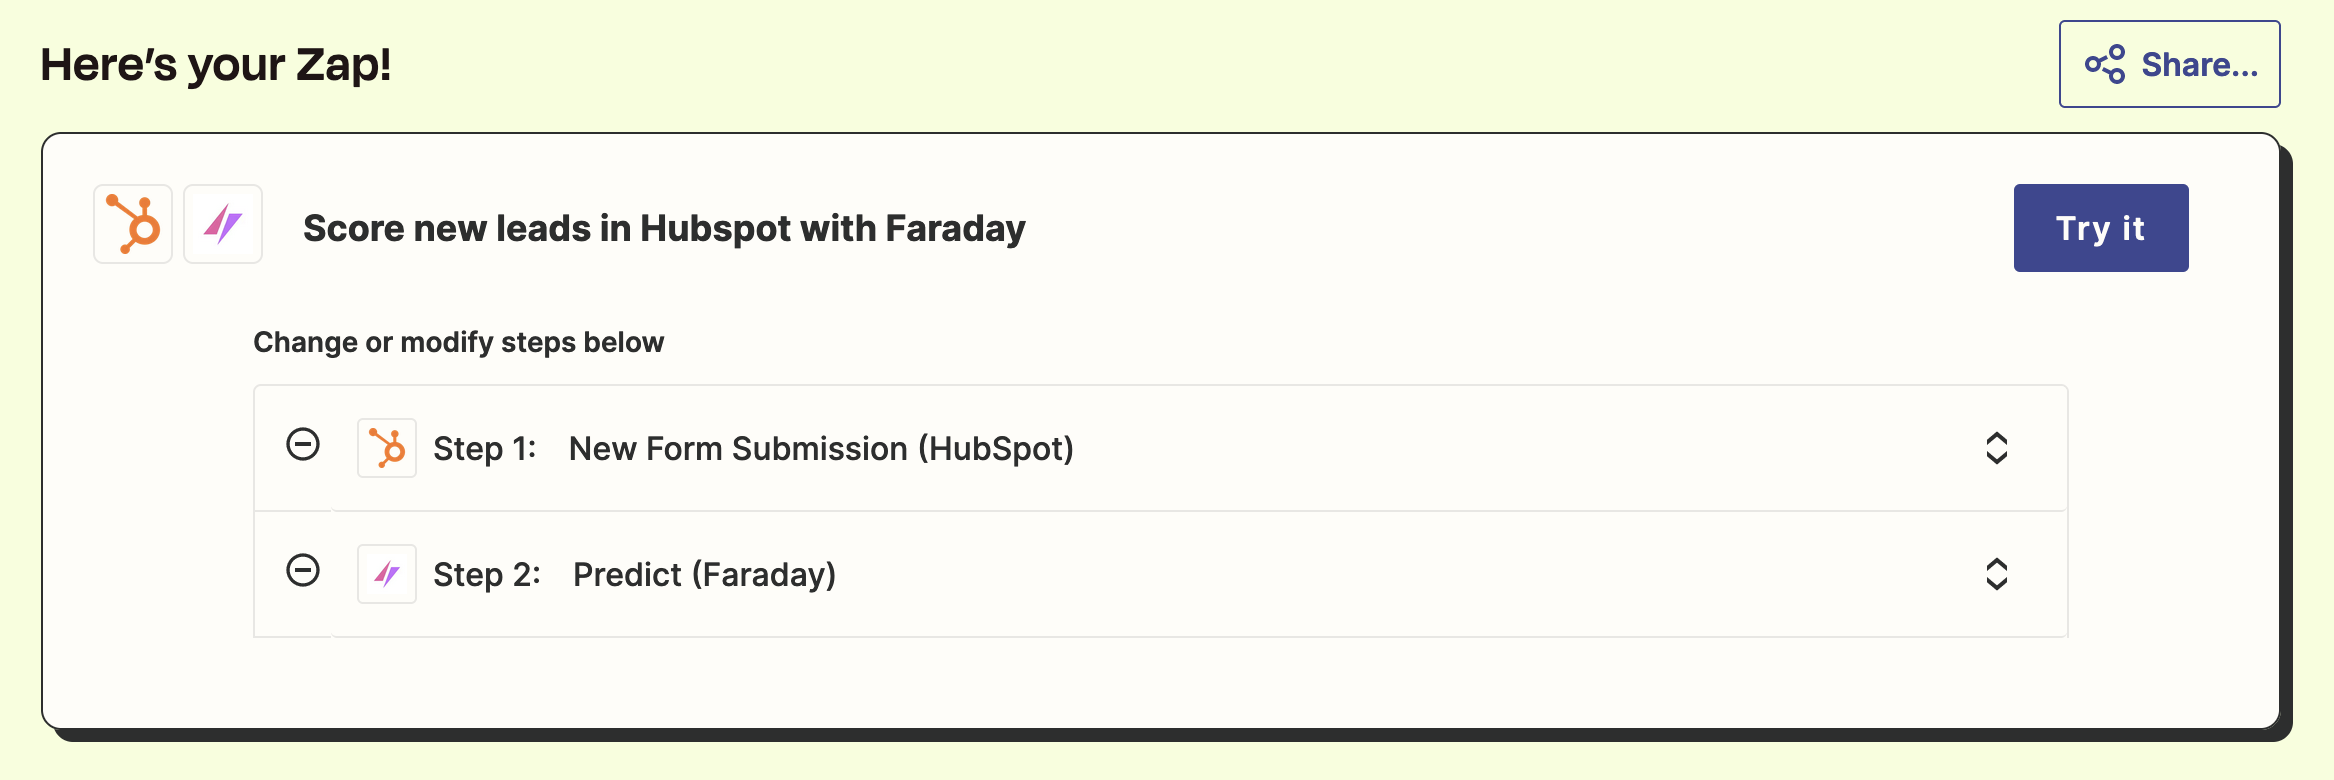 Zapier template for "Score new leads in HubSpot with Faraday"